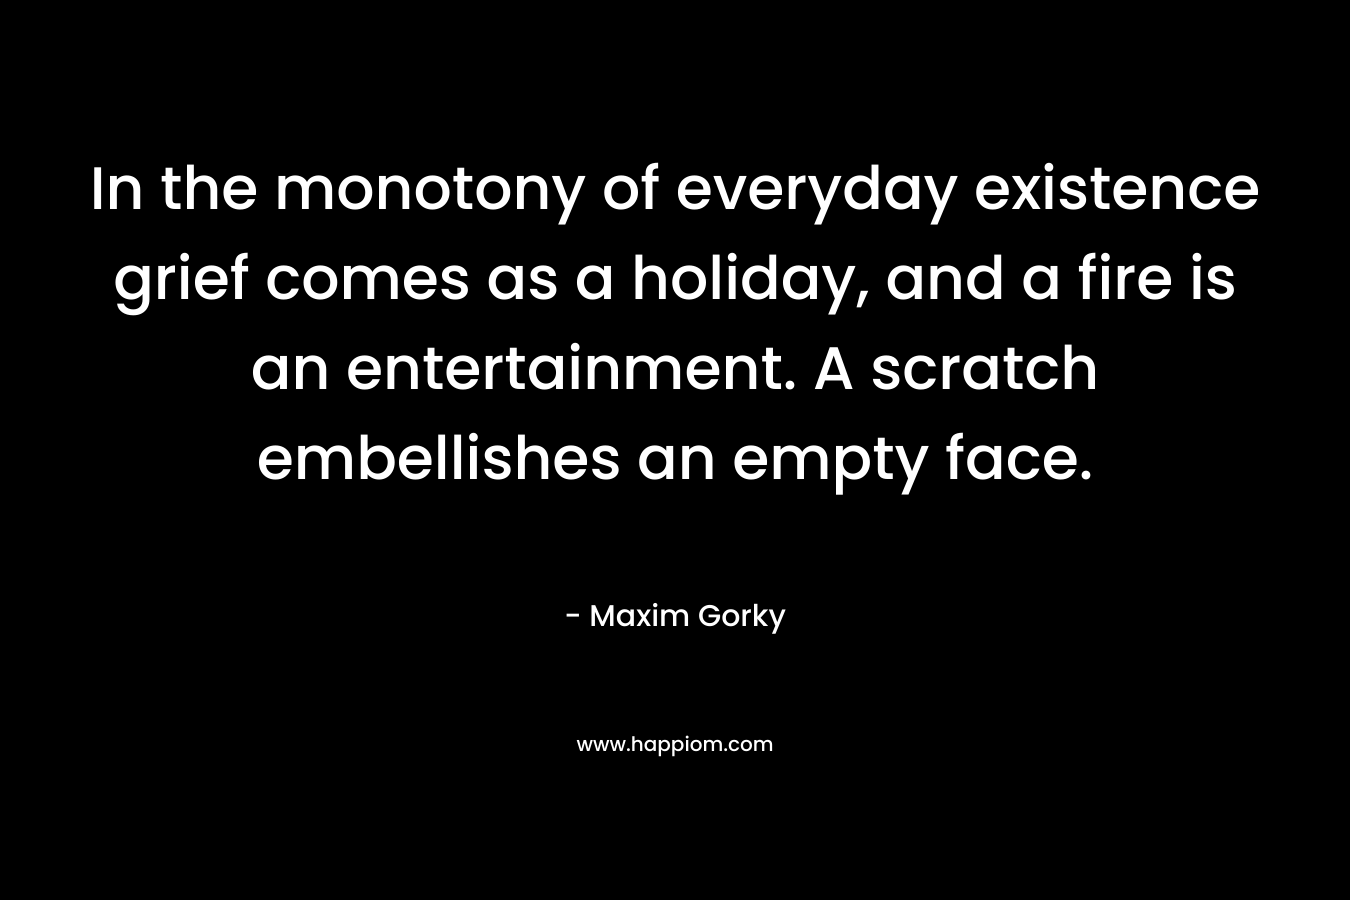 In the monotony of everyday existence grief comes as a holiday, and a fire is an entertainment. A scratch embellishes an empty face. – Maxim Gorky